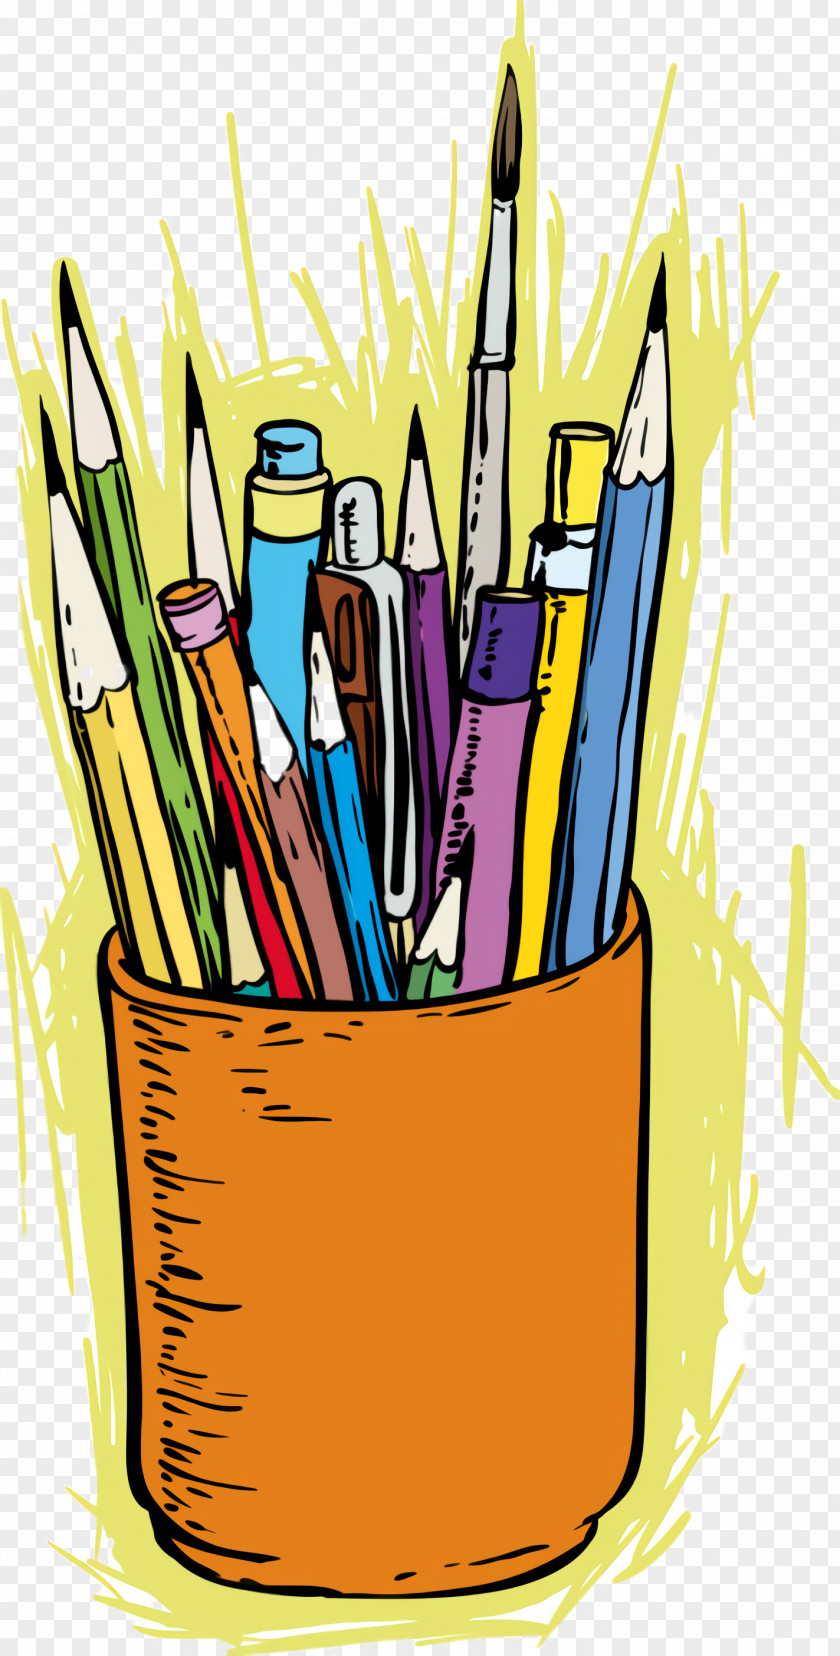 Office Supplies Stationery Pencil Writing Implement Clip Art Graphic Design PNG